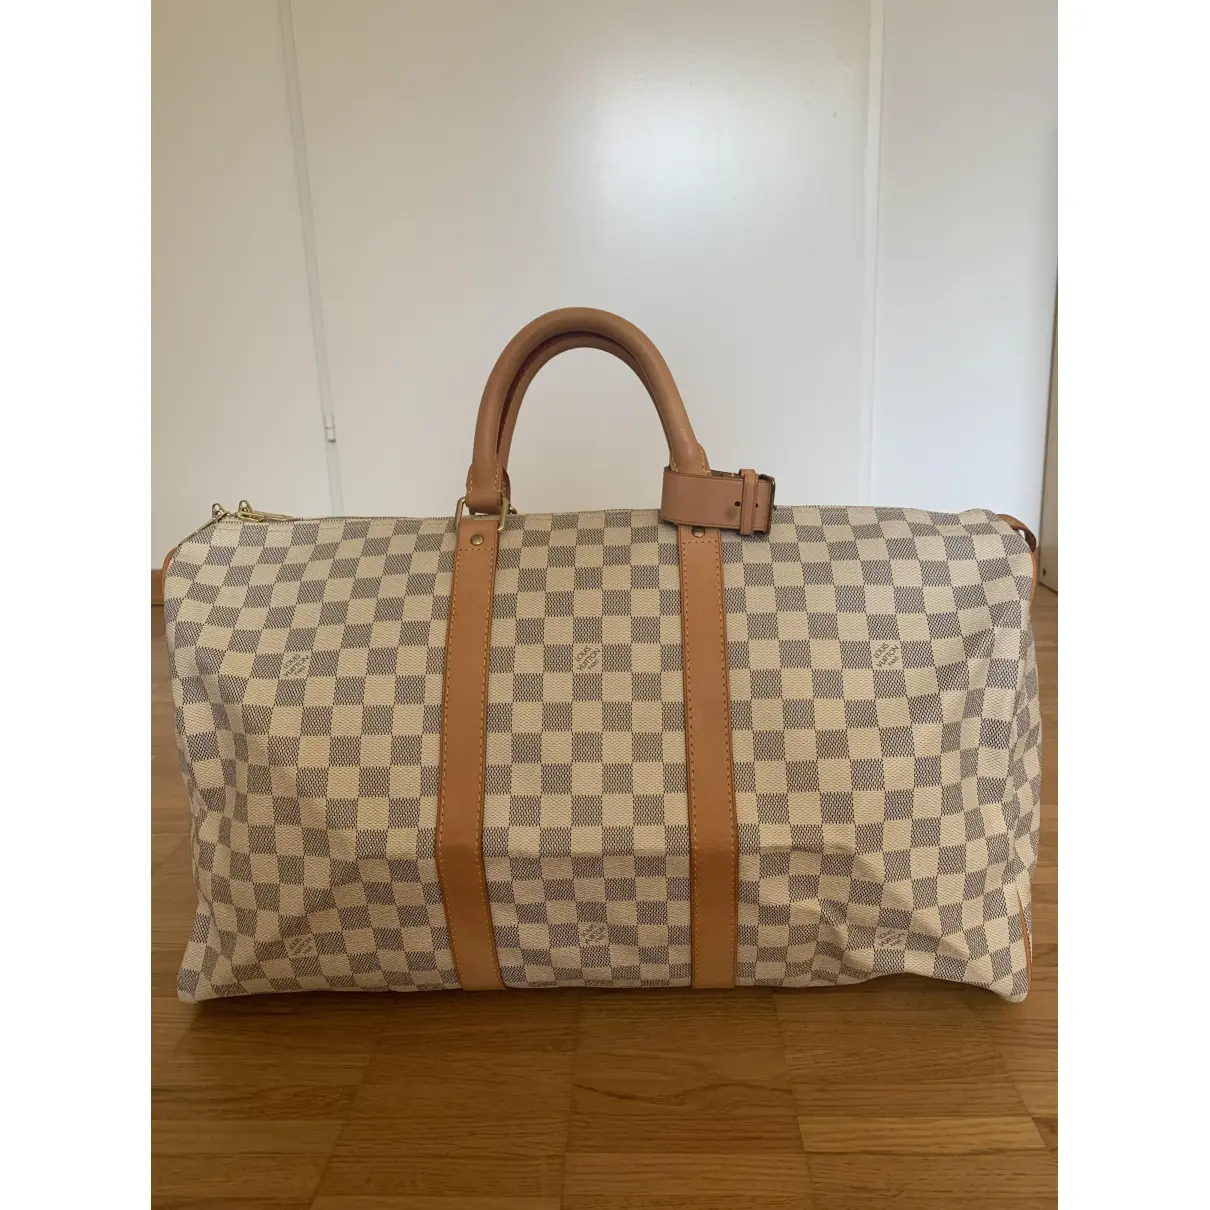 Buy Louis Vuitton Keepall leather 48h bag online